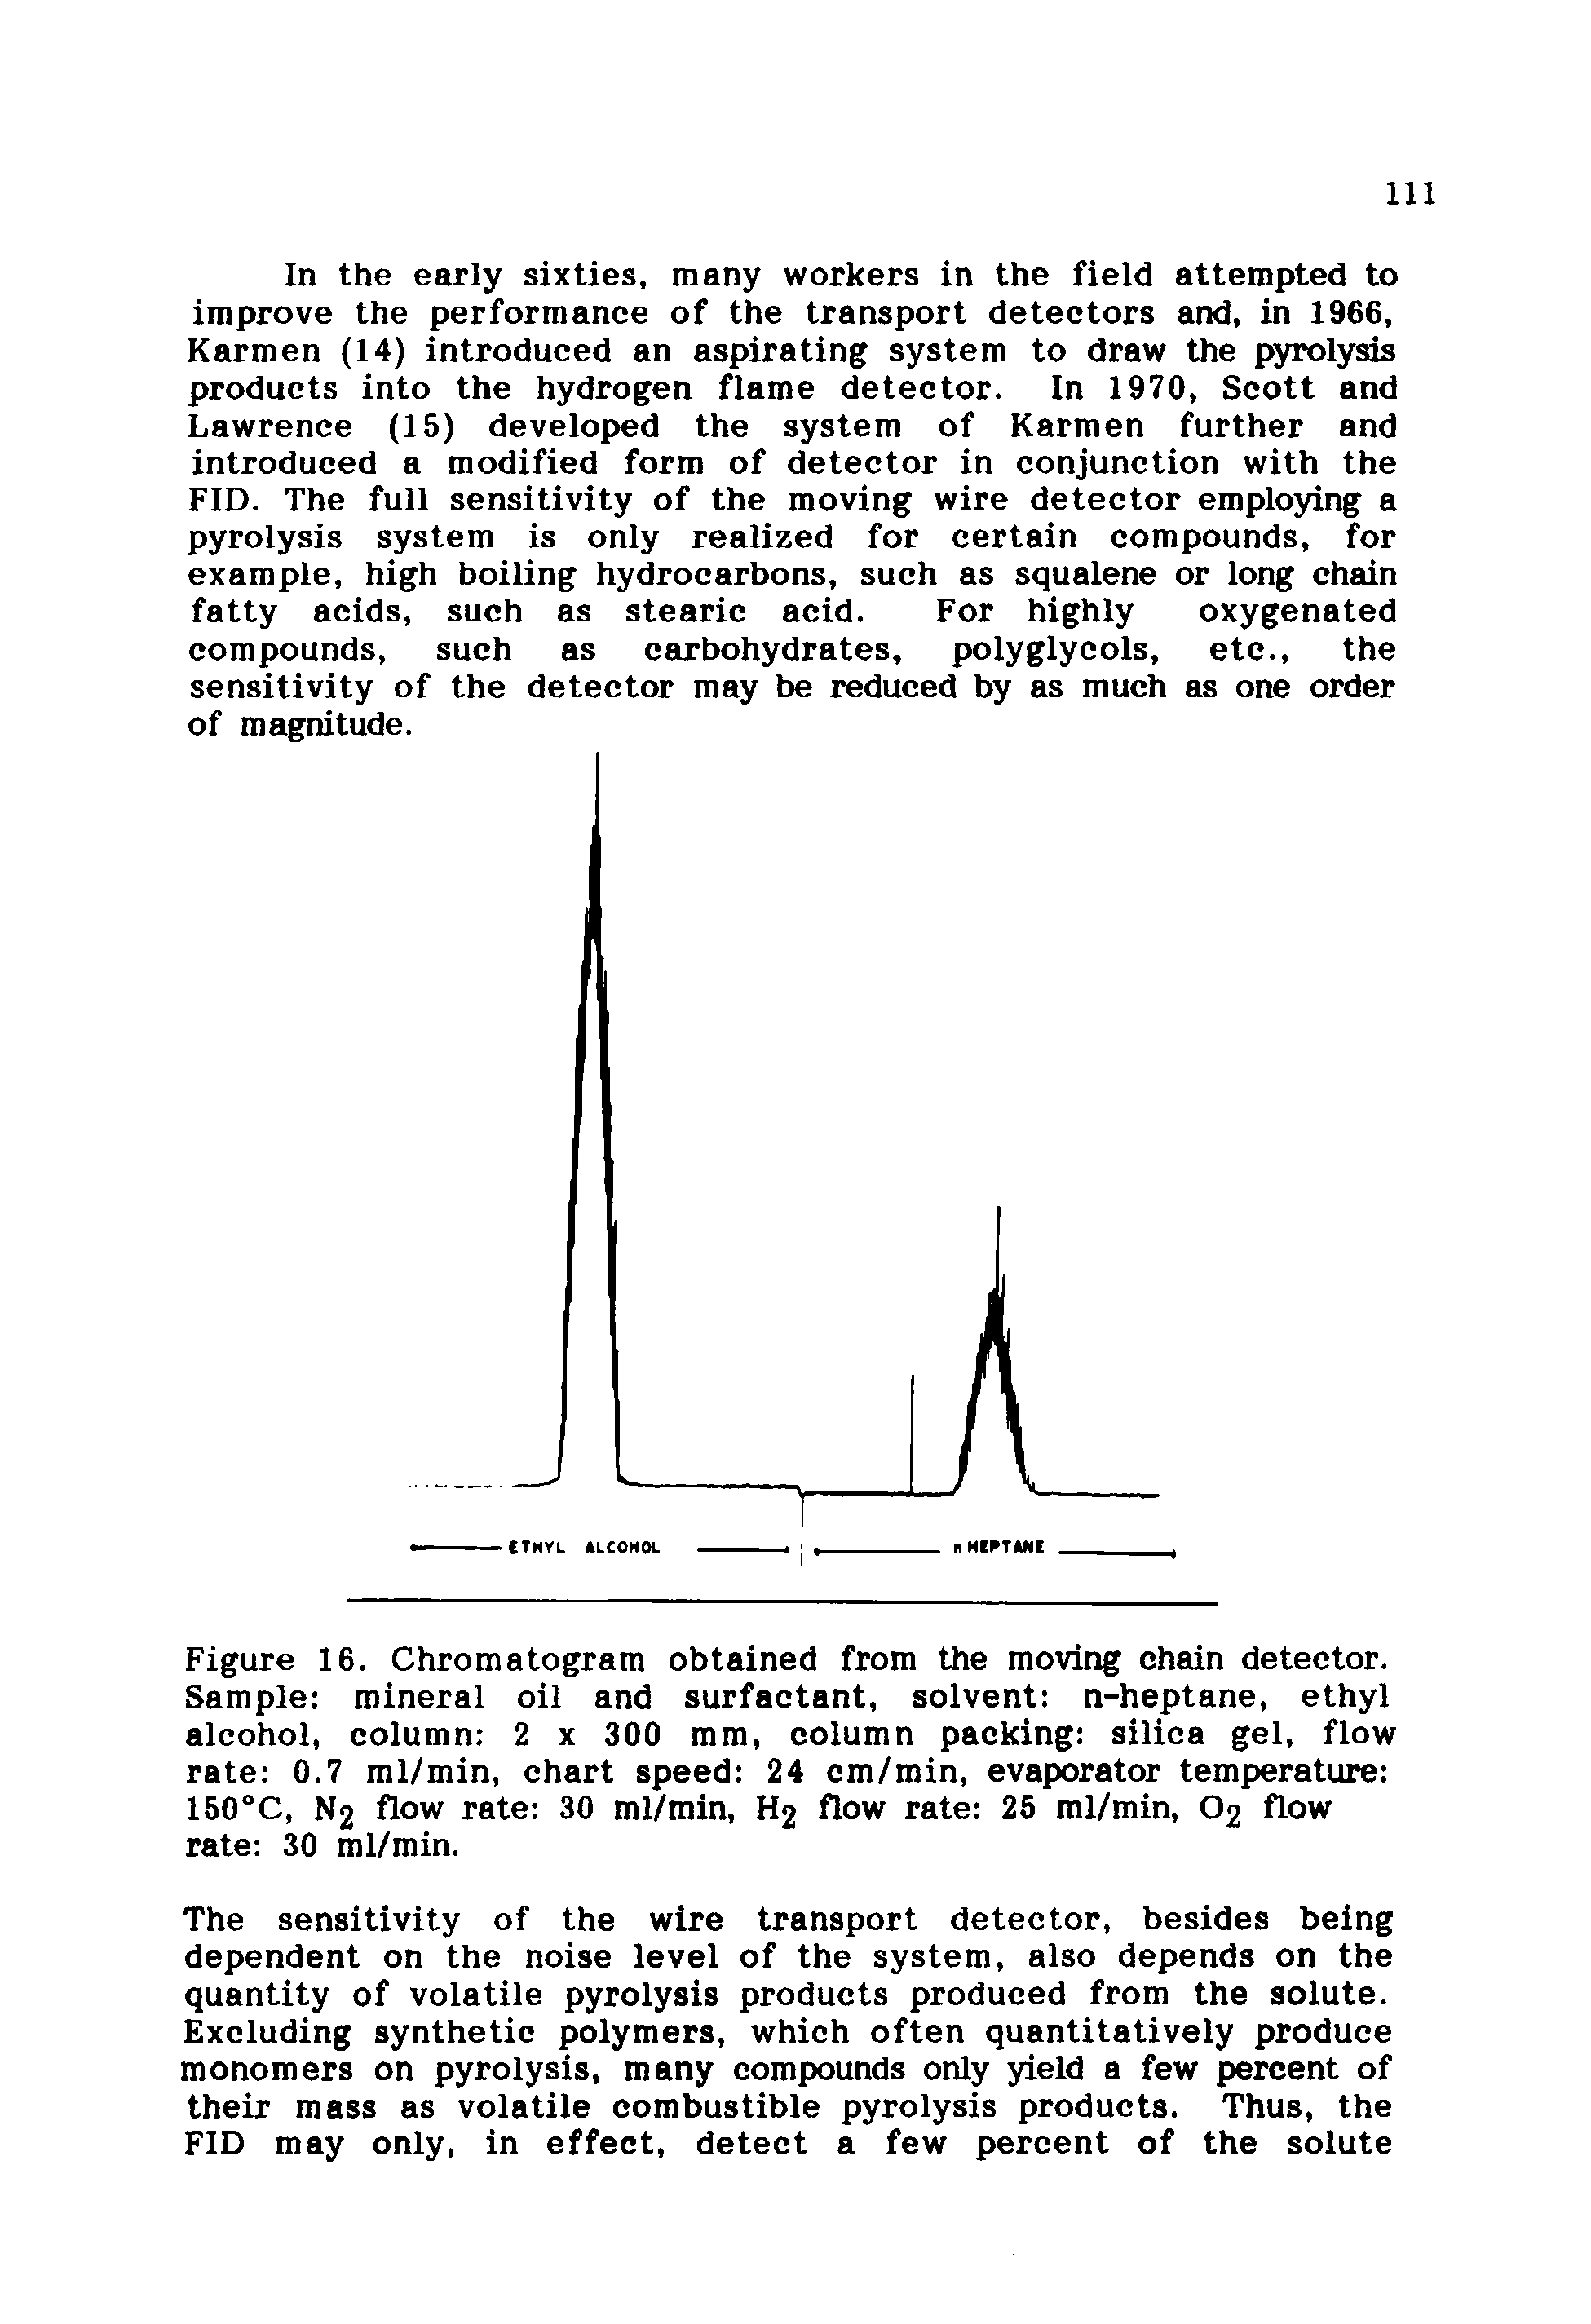 Figure 16. Chromatogram obtained from the moving chain detector. Sample mineral oil and surfactant, solvent n-heptane, ethyl alcohol, column 2 x 300 mm, column packing silica gel, flow rate 0.7 ml/min, chart speed 24 cm/min, evaporator temperature 150°C, N2 flow rate 30 ml/min, H2 flow rate 25 ml/min, O2 flow rate 30 ml/min.